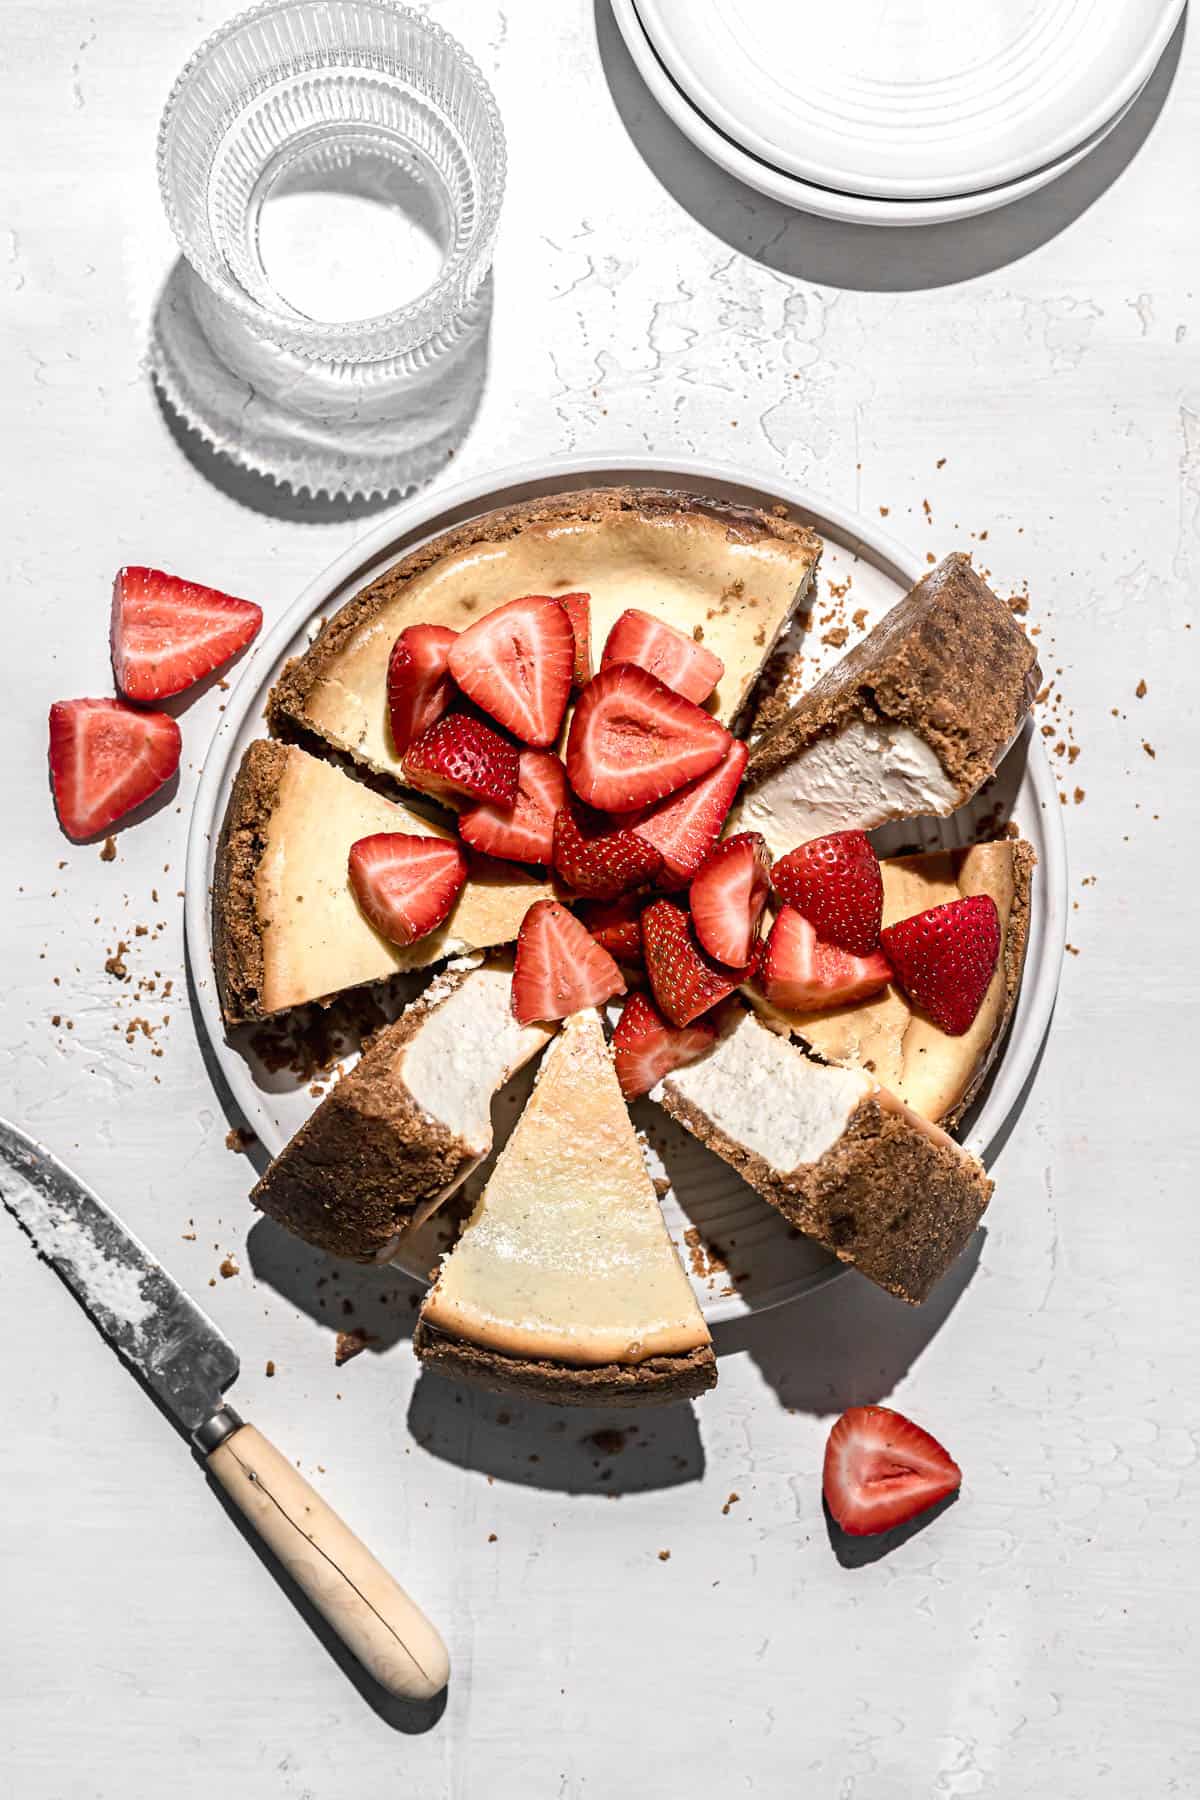 ricotta cheesecake with strawberries cut into slices on white plate.